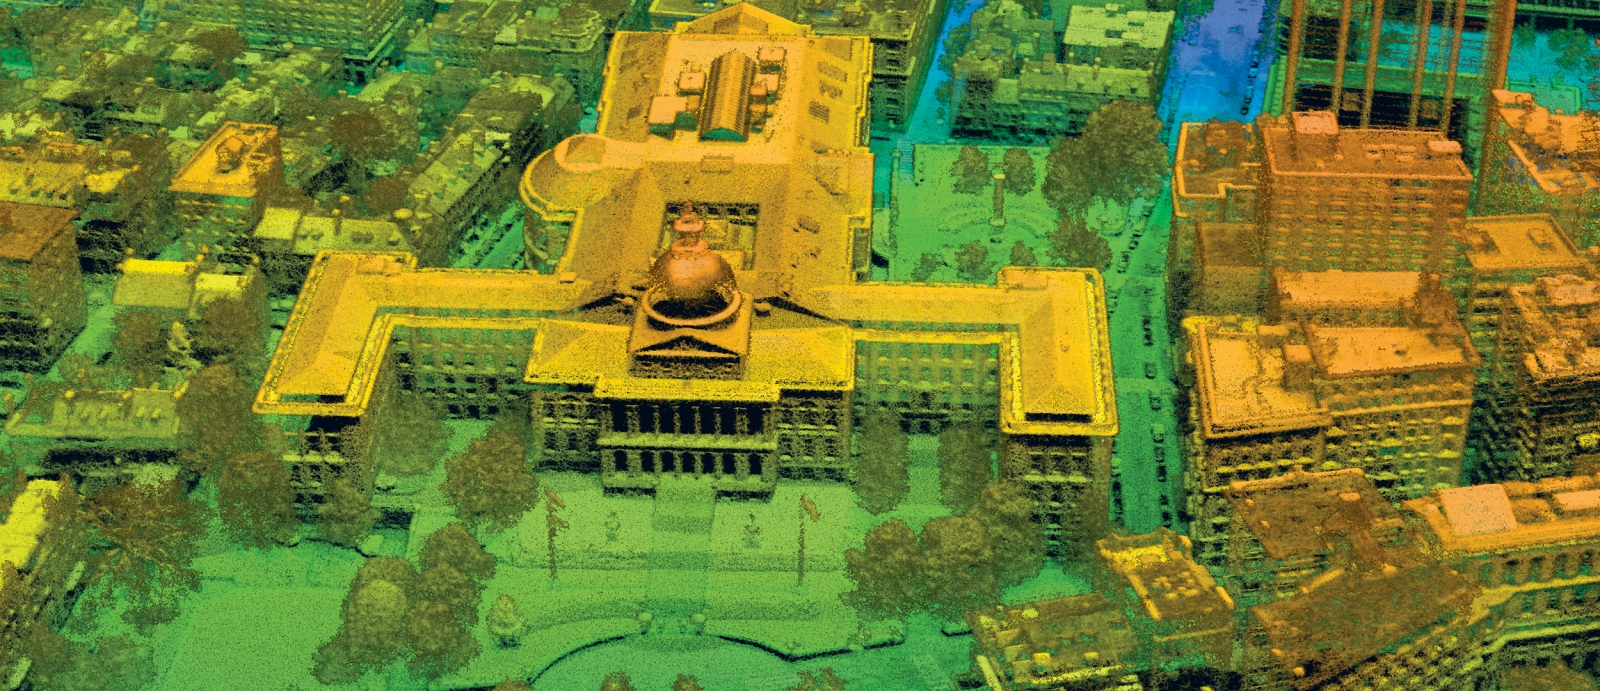 In this 3D ladar image of the Massachusetts State House, the colors indicate height, ranging from ground level at blue through the spectrum to red for the tallest elements in the image.